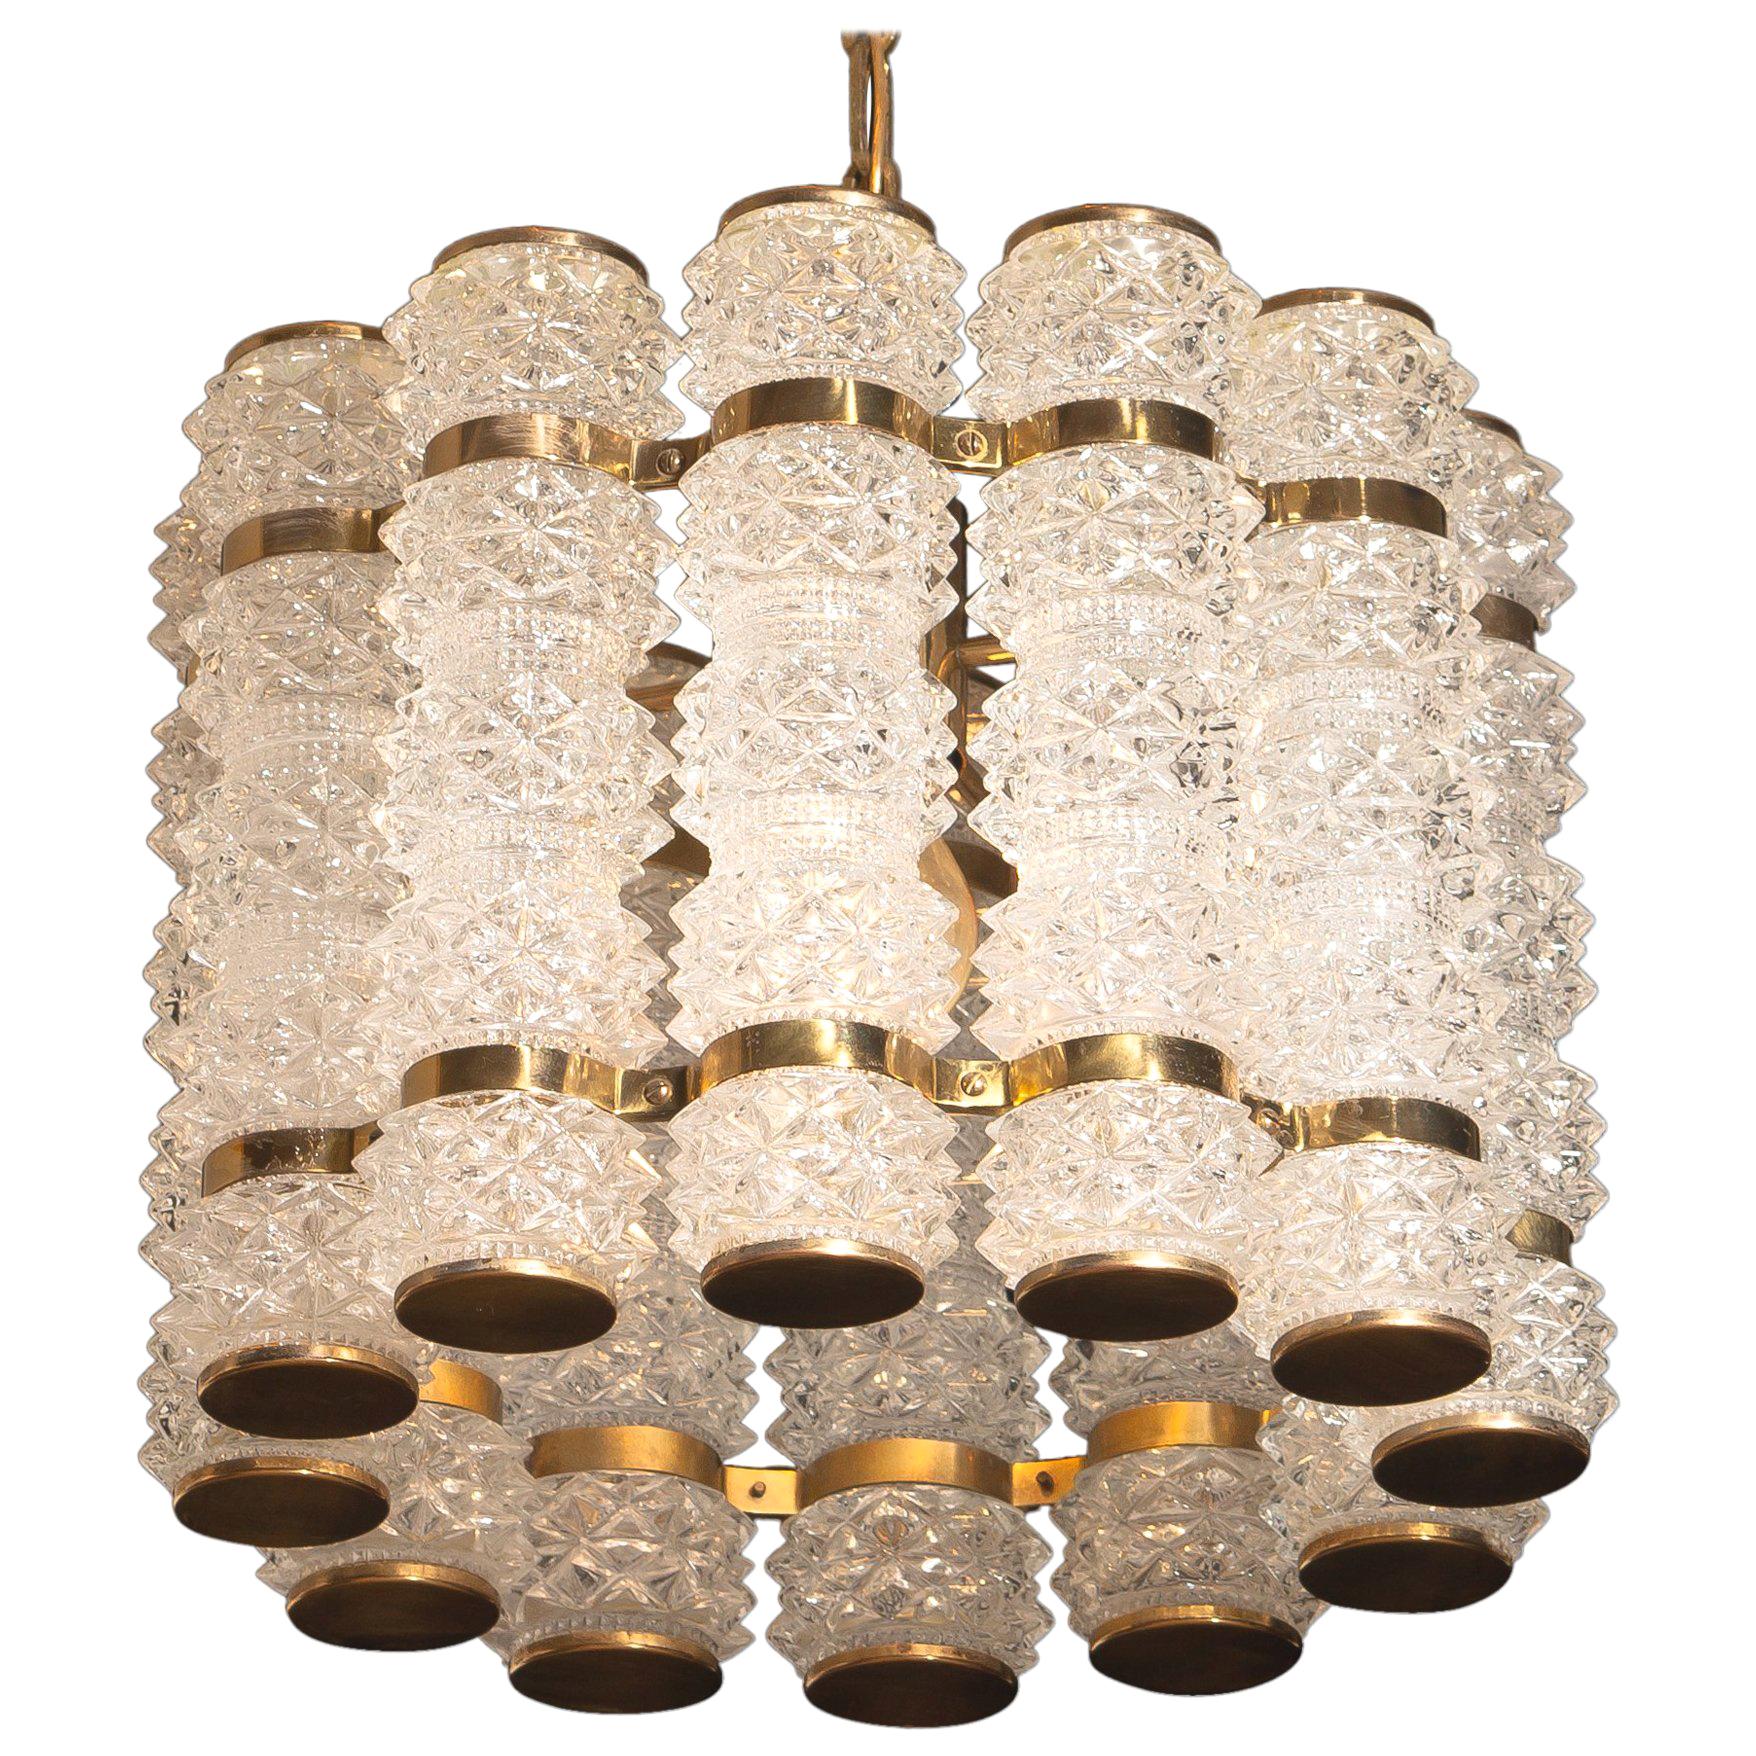 Mid-Century Modern 1960s, Brass and Crystal Cylinder Chandelier by Orrefors for Tyringe, Sweden